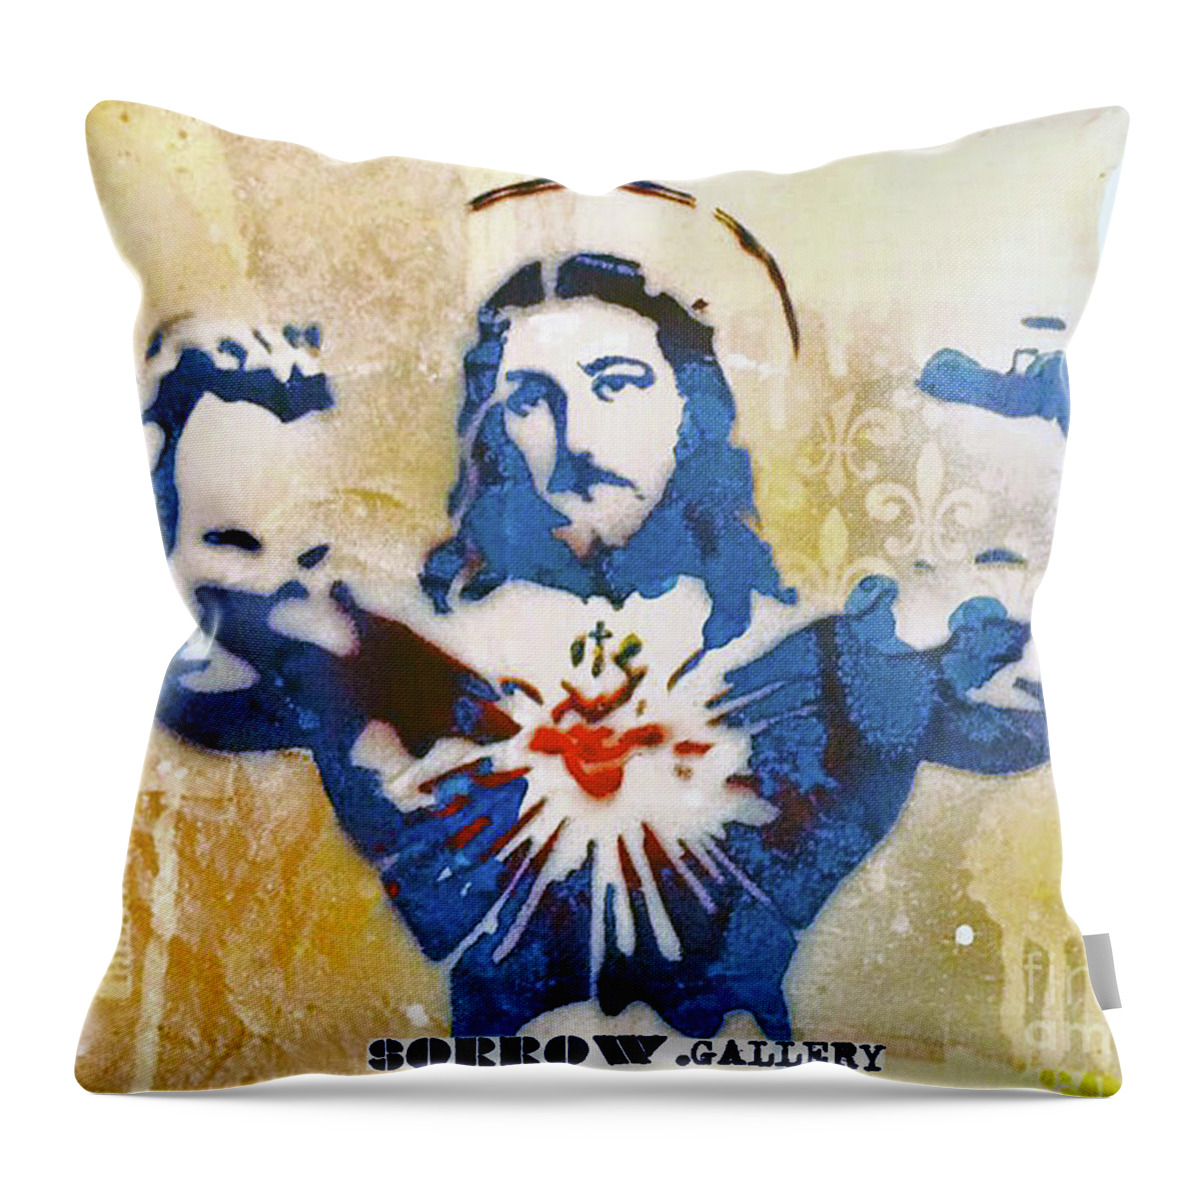  Throw Pillow featuring the mixed media Watermarked Promo Image by SORROW Gallery